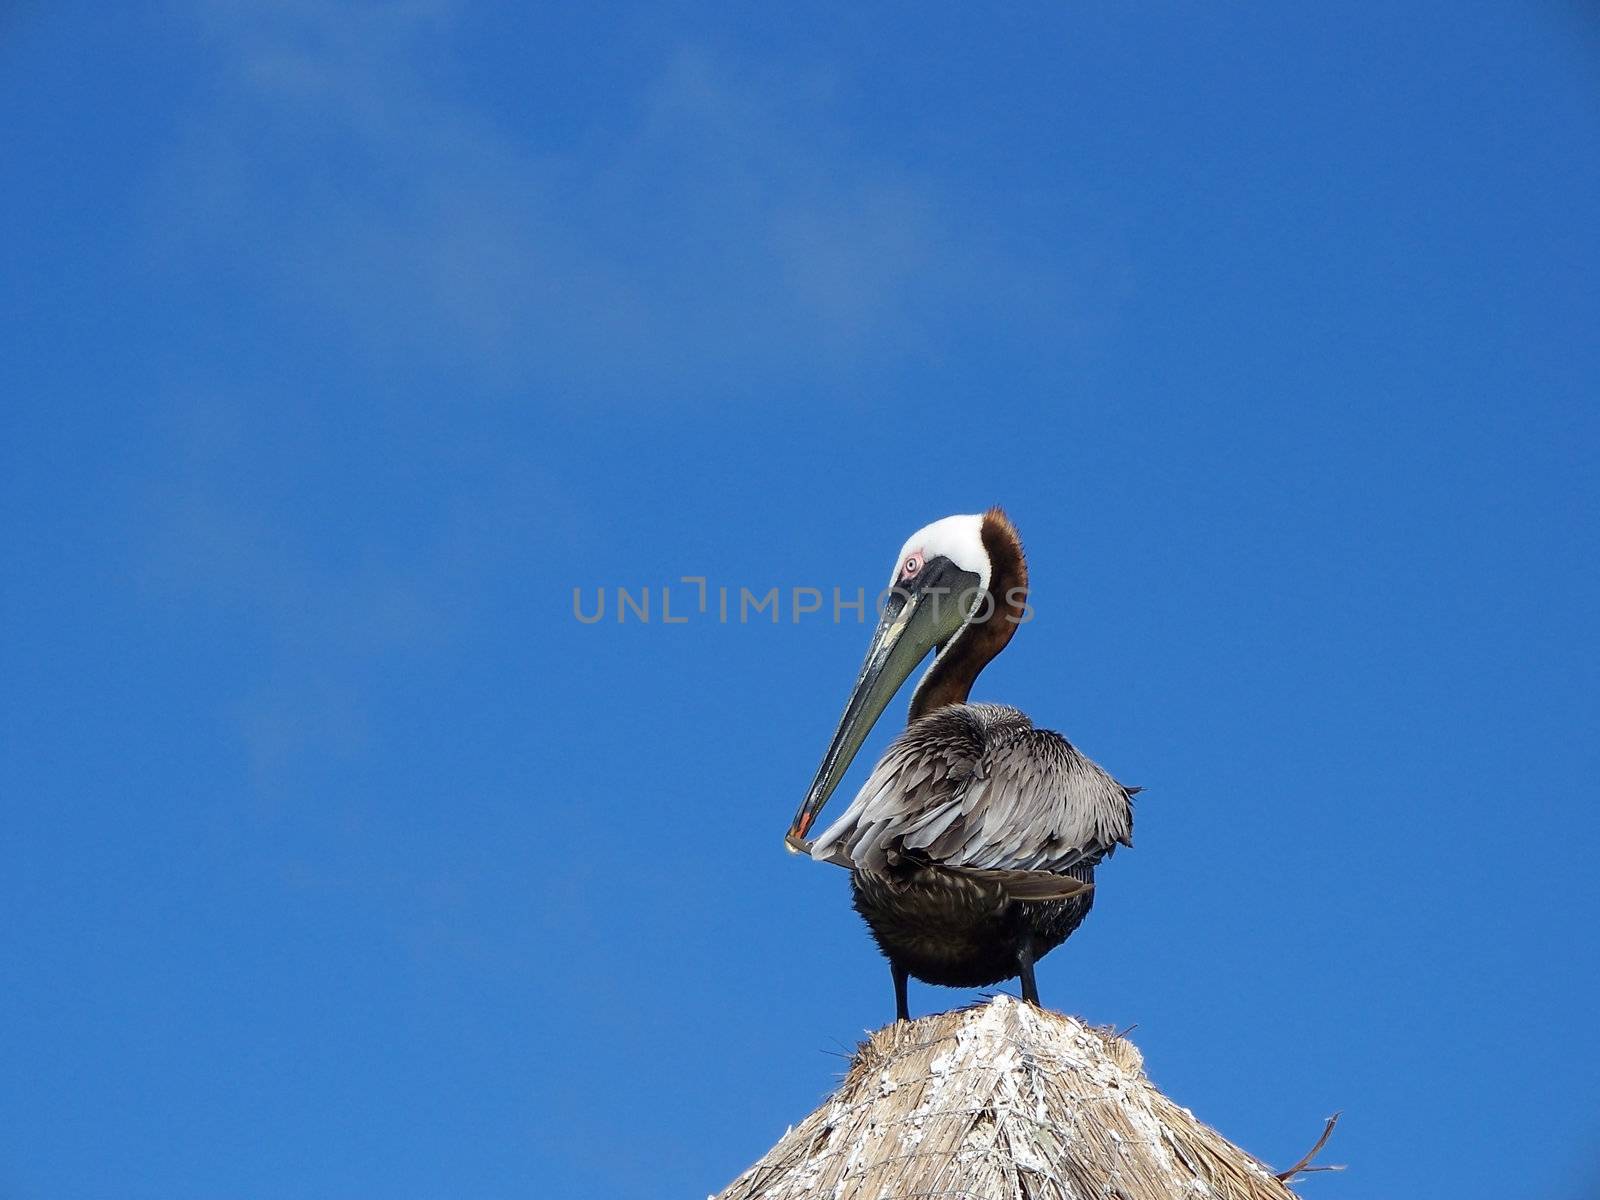 pelican pruning himself on the top of a tiki hut